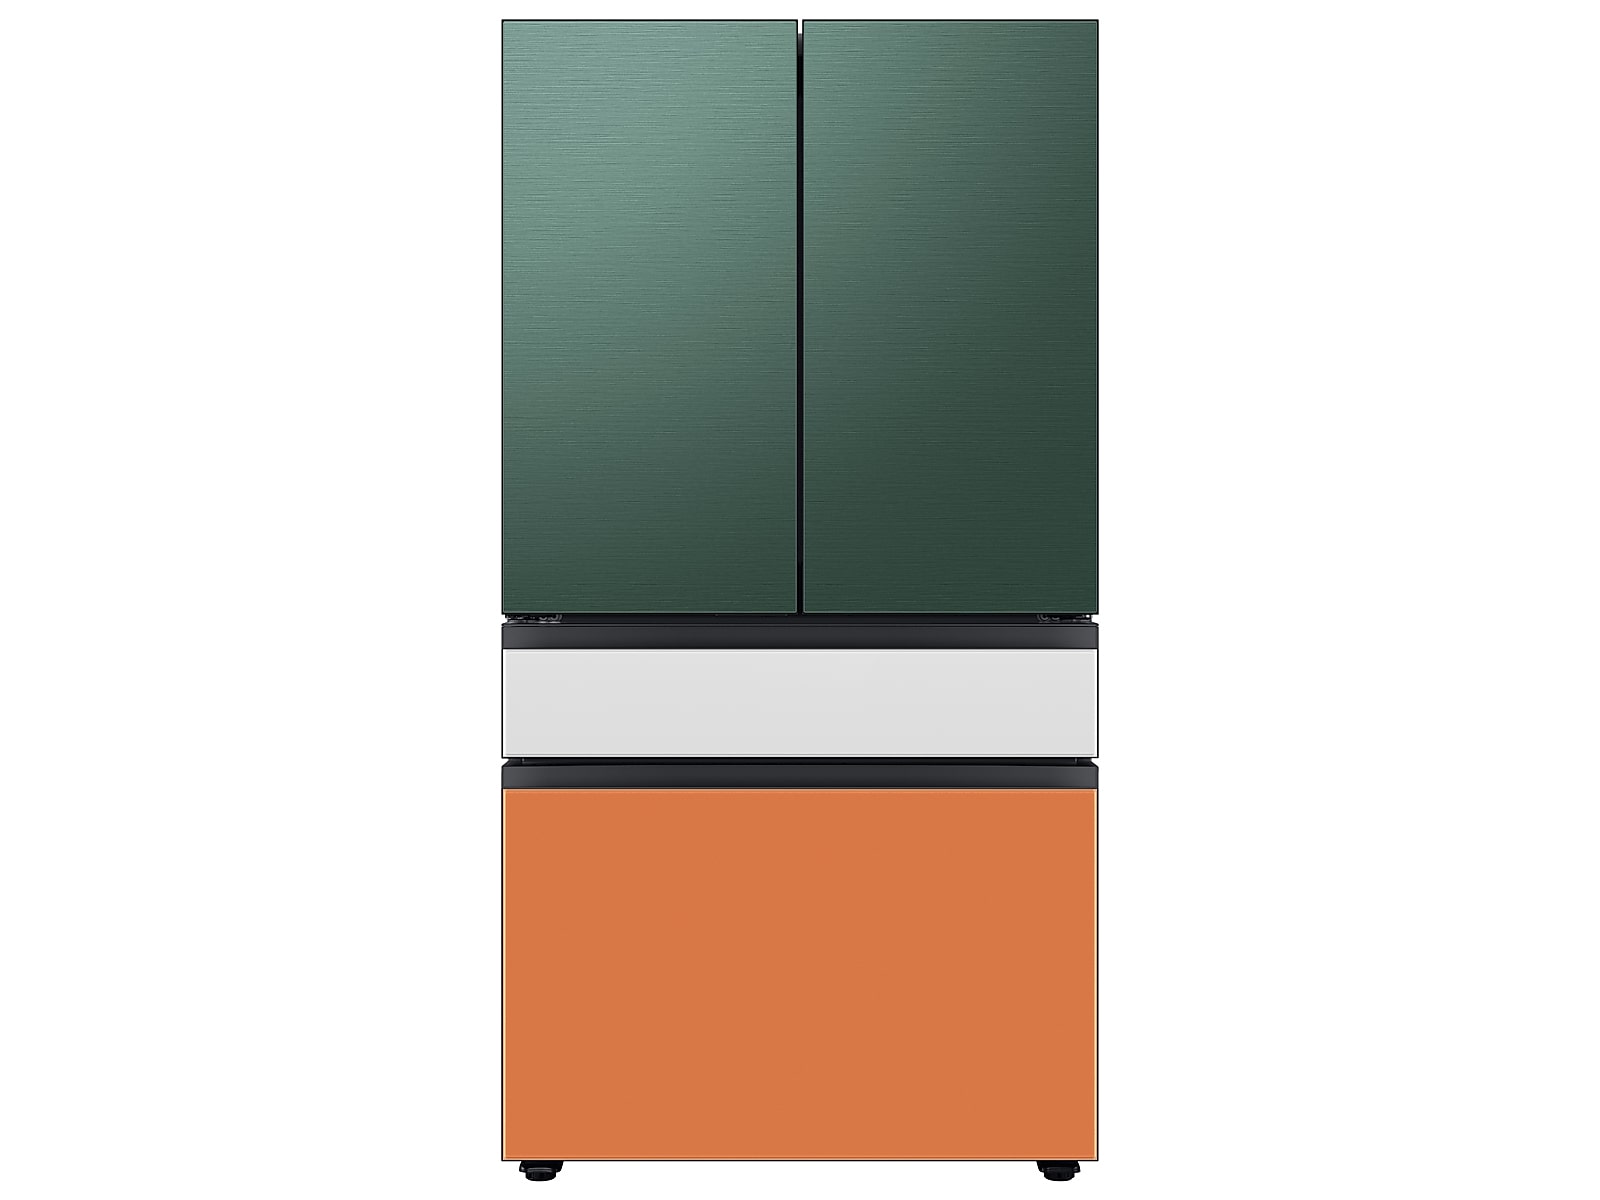 Samsung Bespoke 4-Door French Door Refrigerator (29 cu. ft.) with Customizable Door Panel Colors and Beverage Center™ in Emerald Green Steel Top in White Glass Middle, and Clementine Glass Bottom Panels